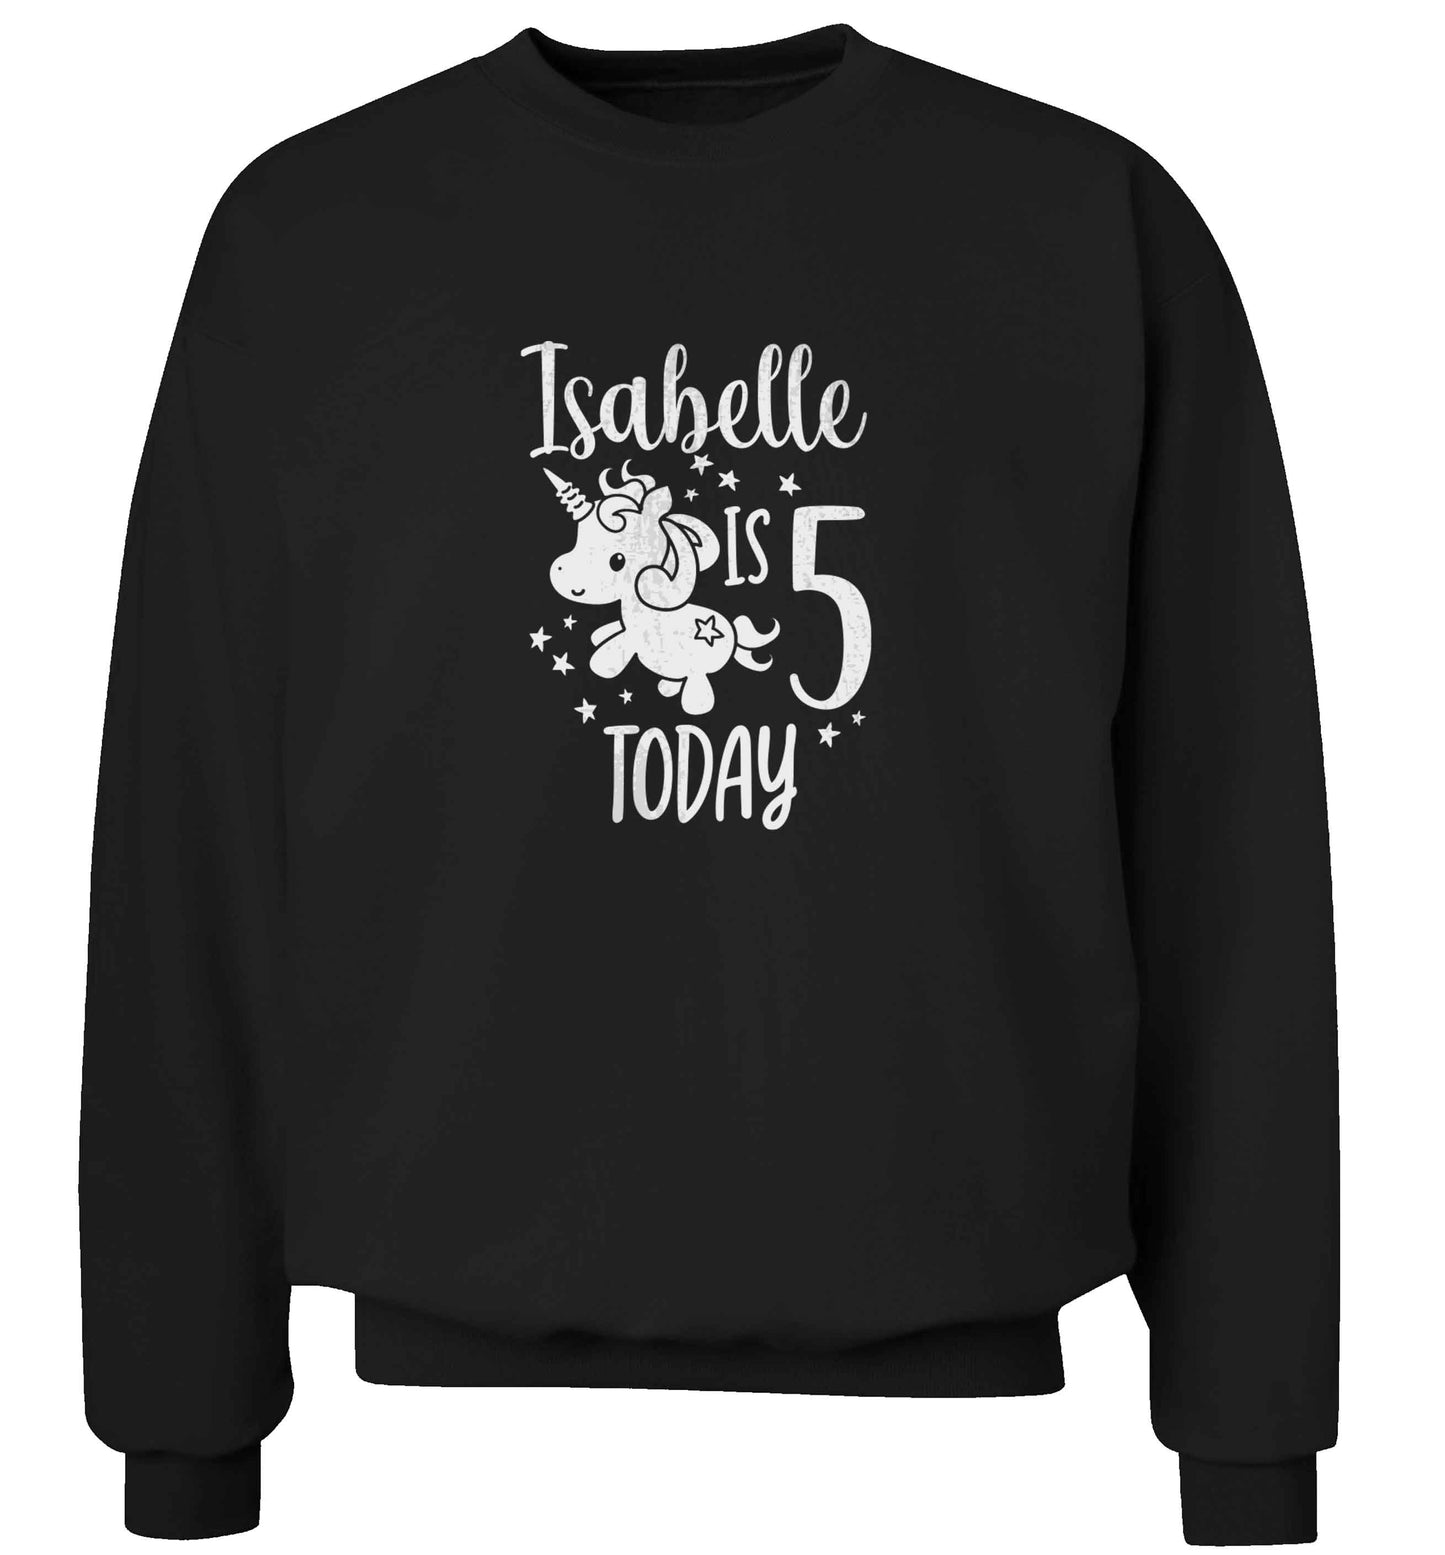 Today I am - Personalise with any name or age! Birthday unicorn adult's unisex black sweater 2XL